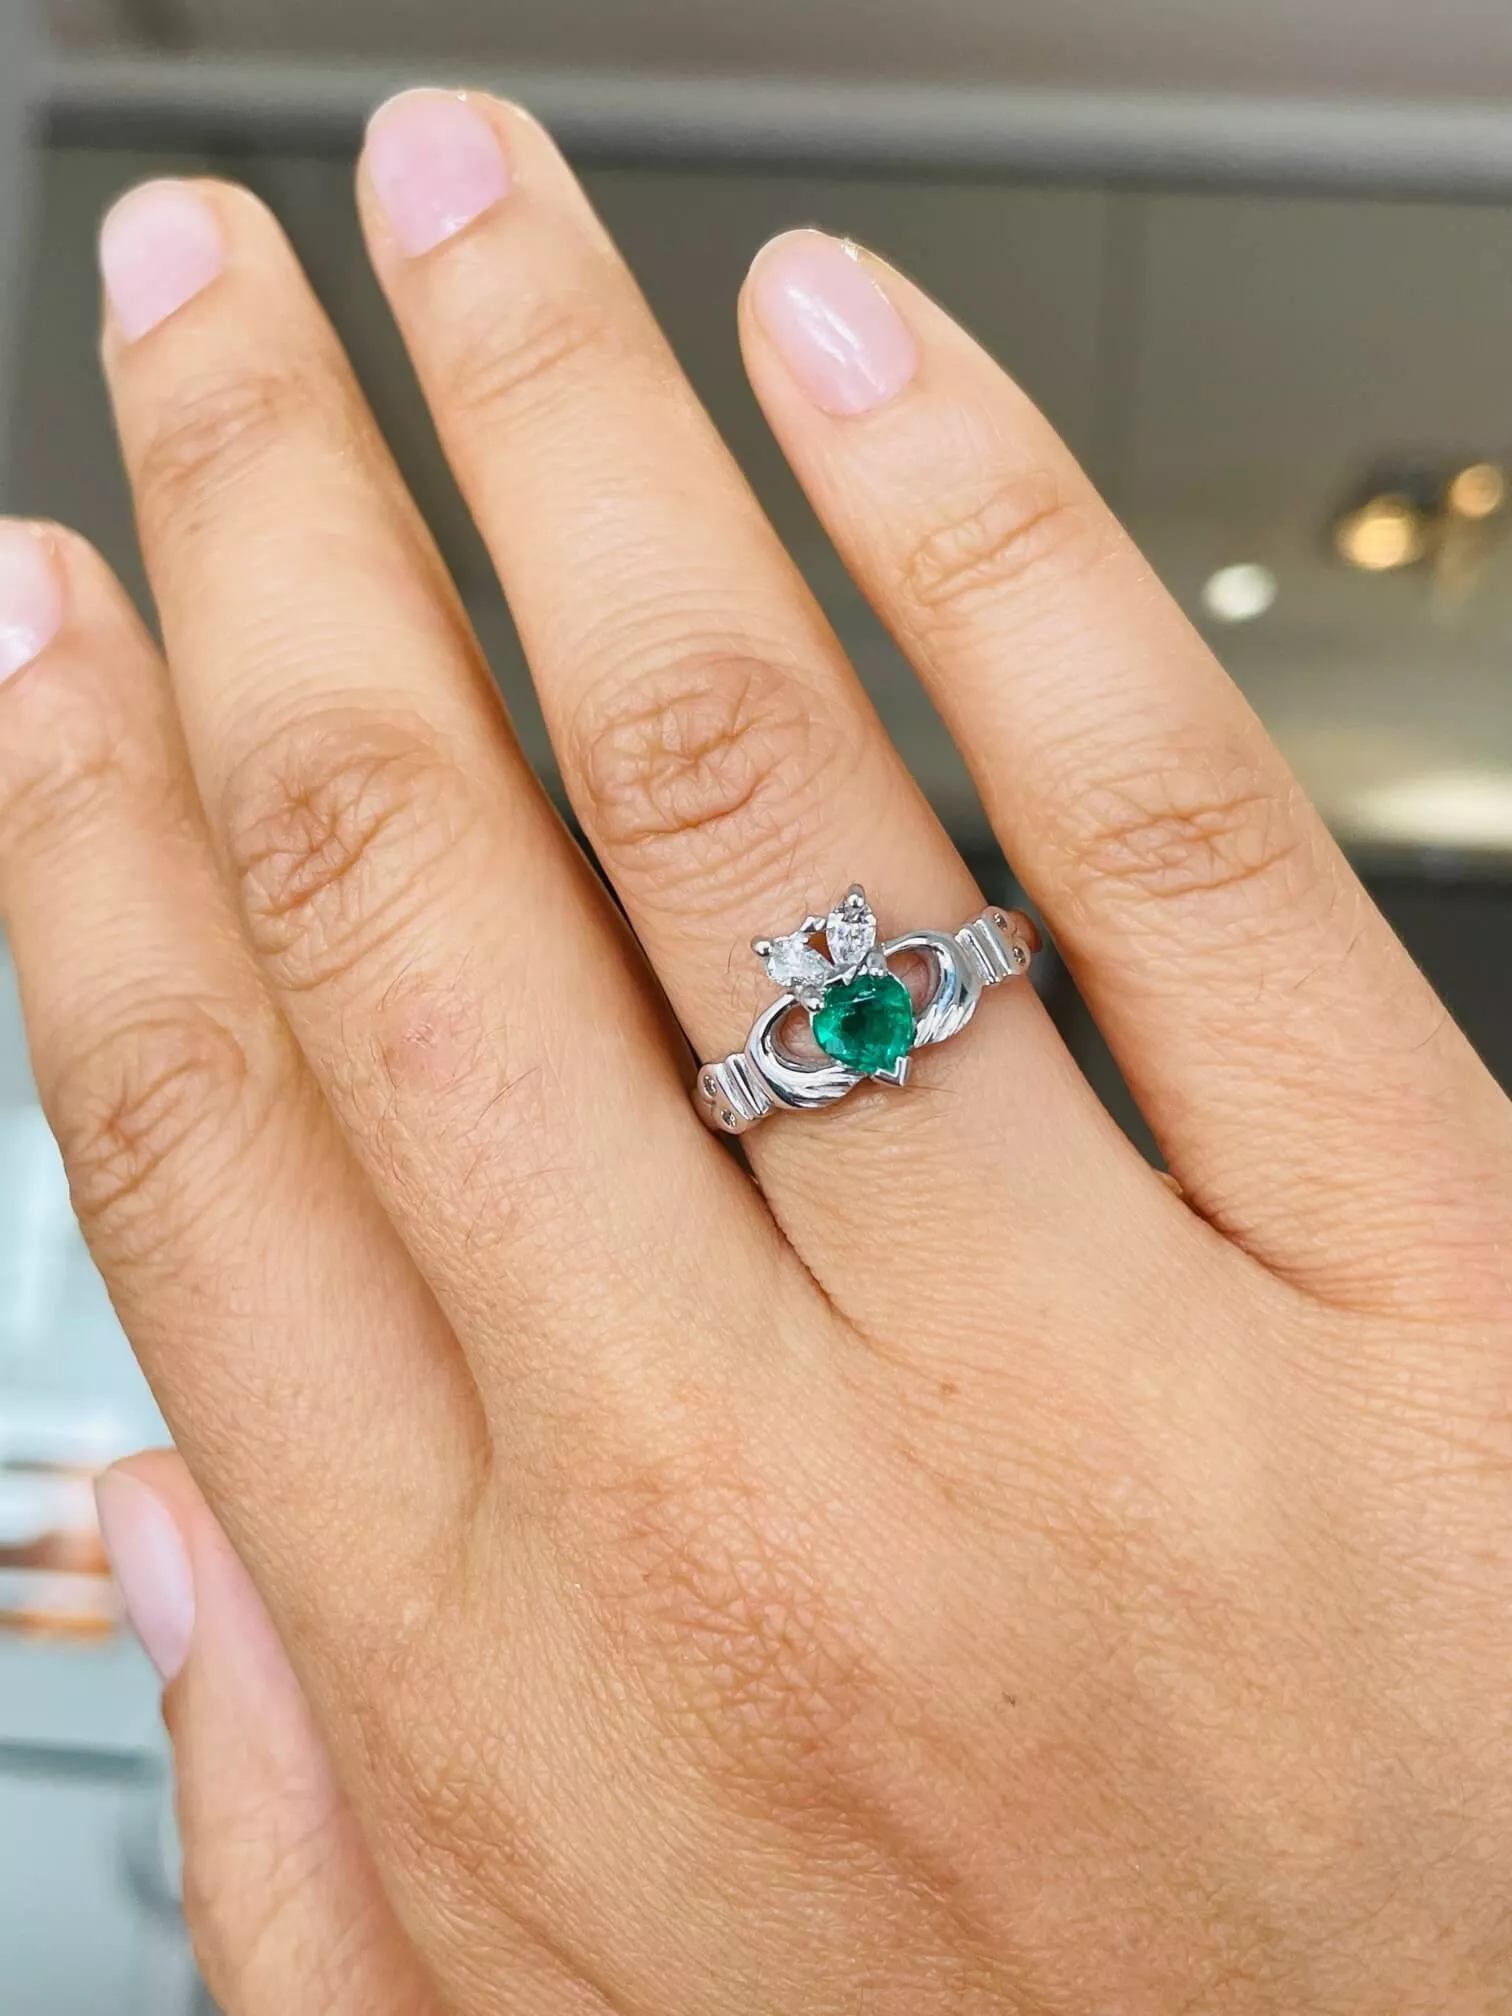 White Gold Claddagh Ring And Emerald 2 2